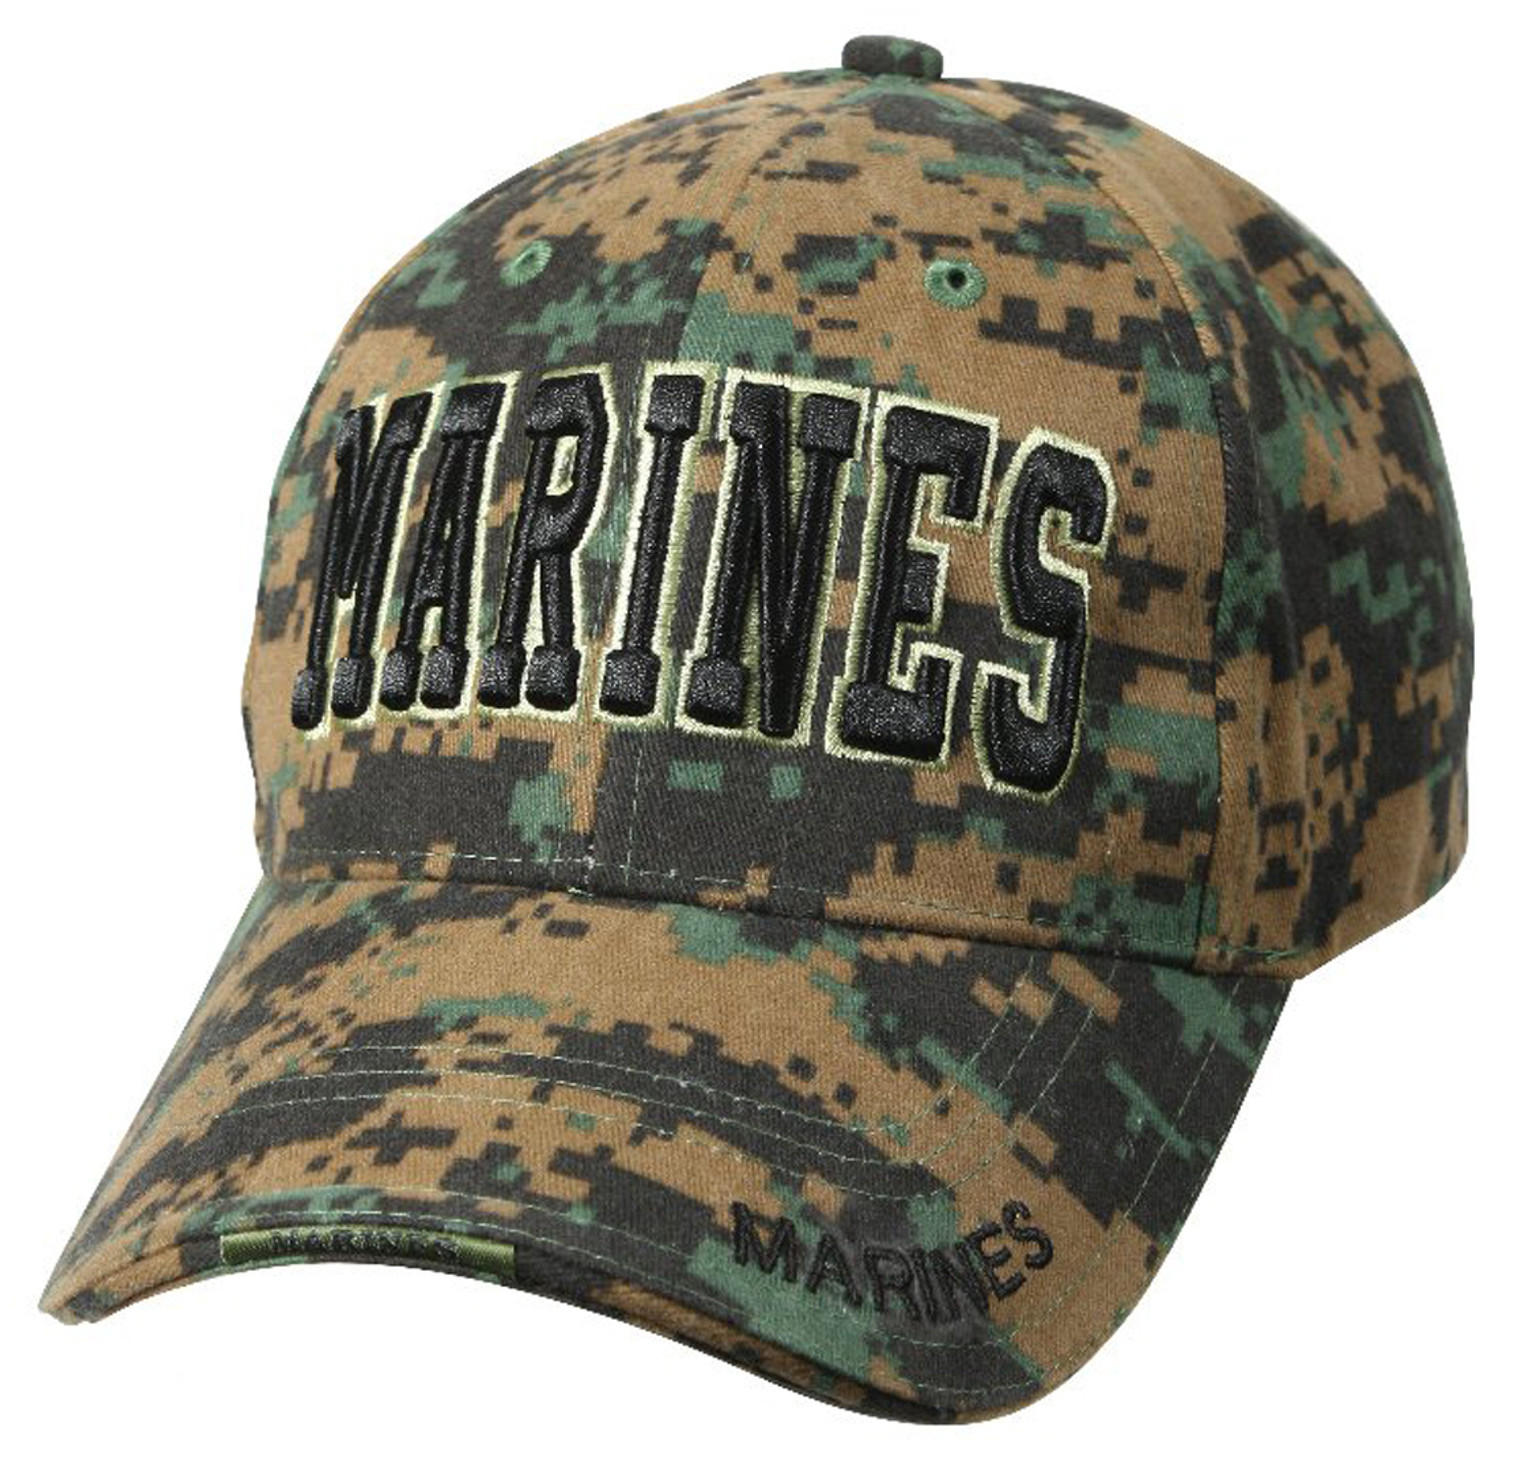 Rothco Deluxe Marines Low Profile Insignia Cap - Woodland Digital 